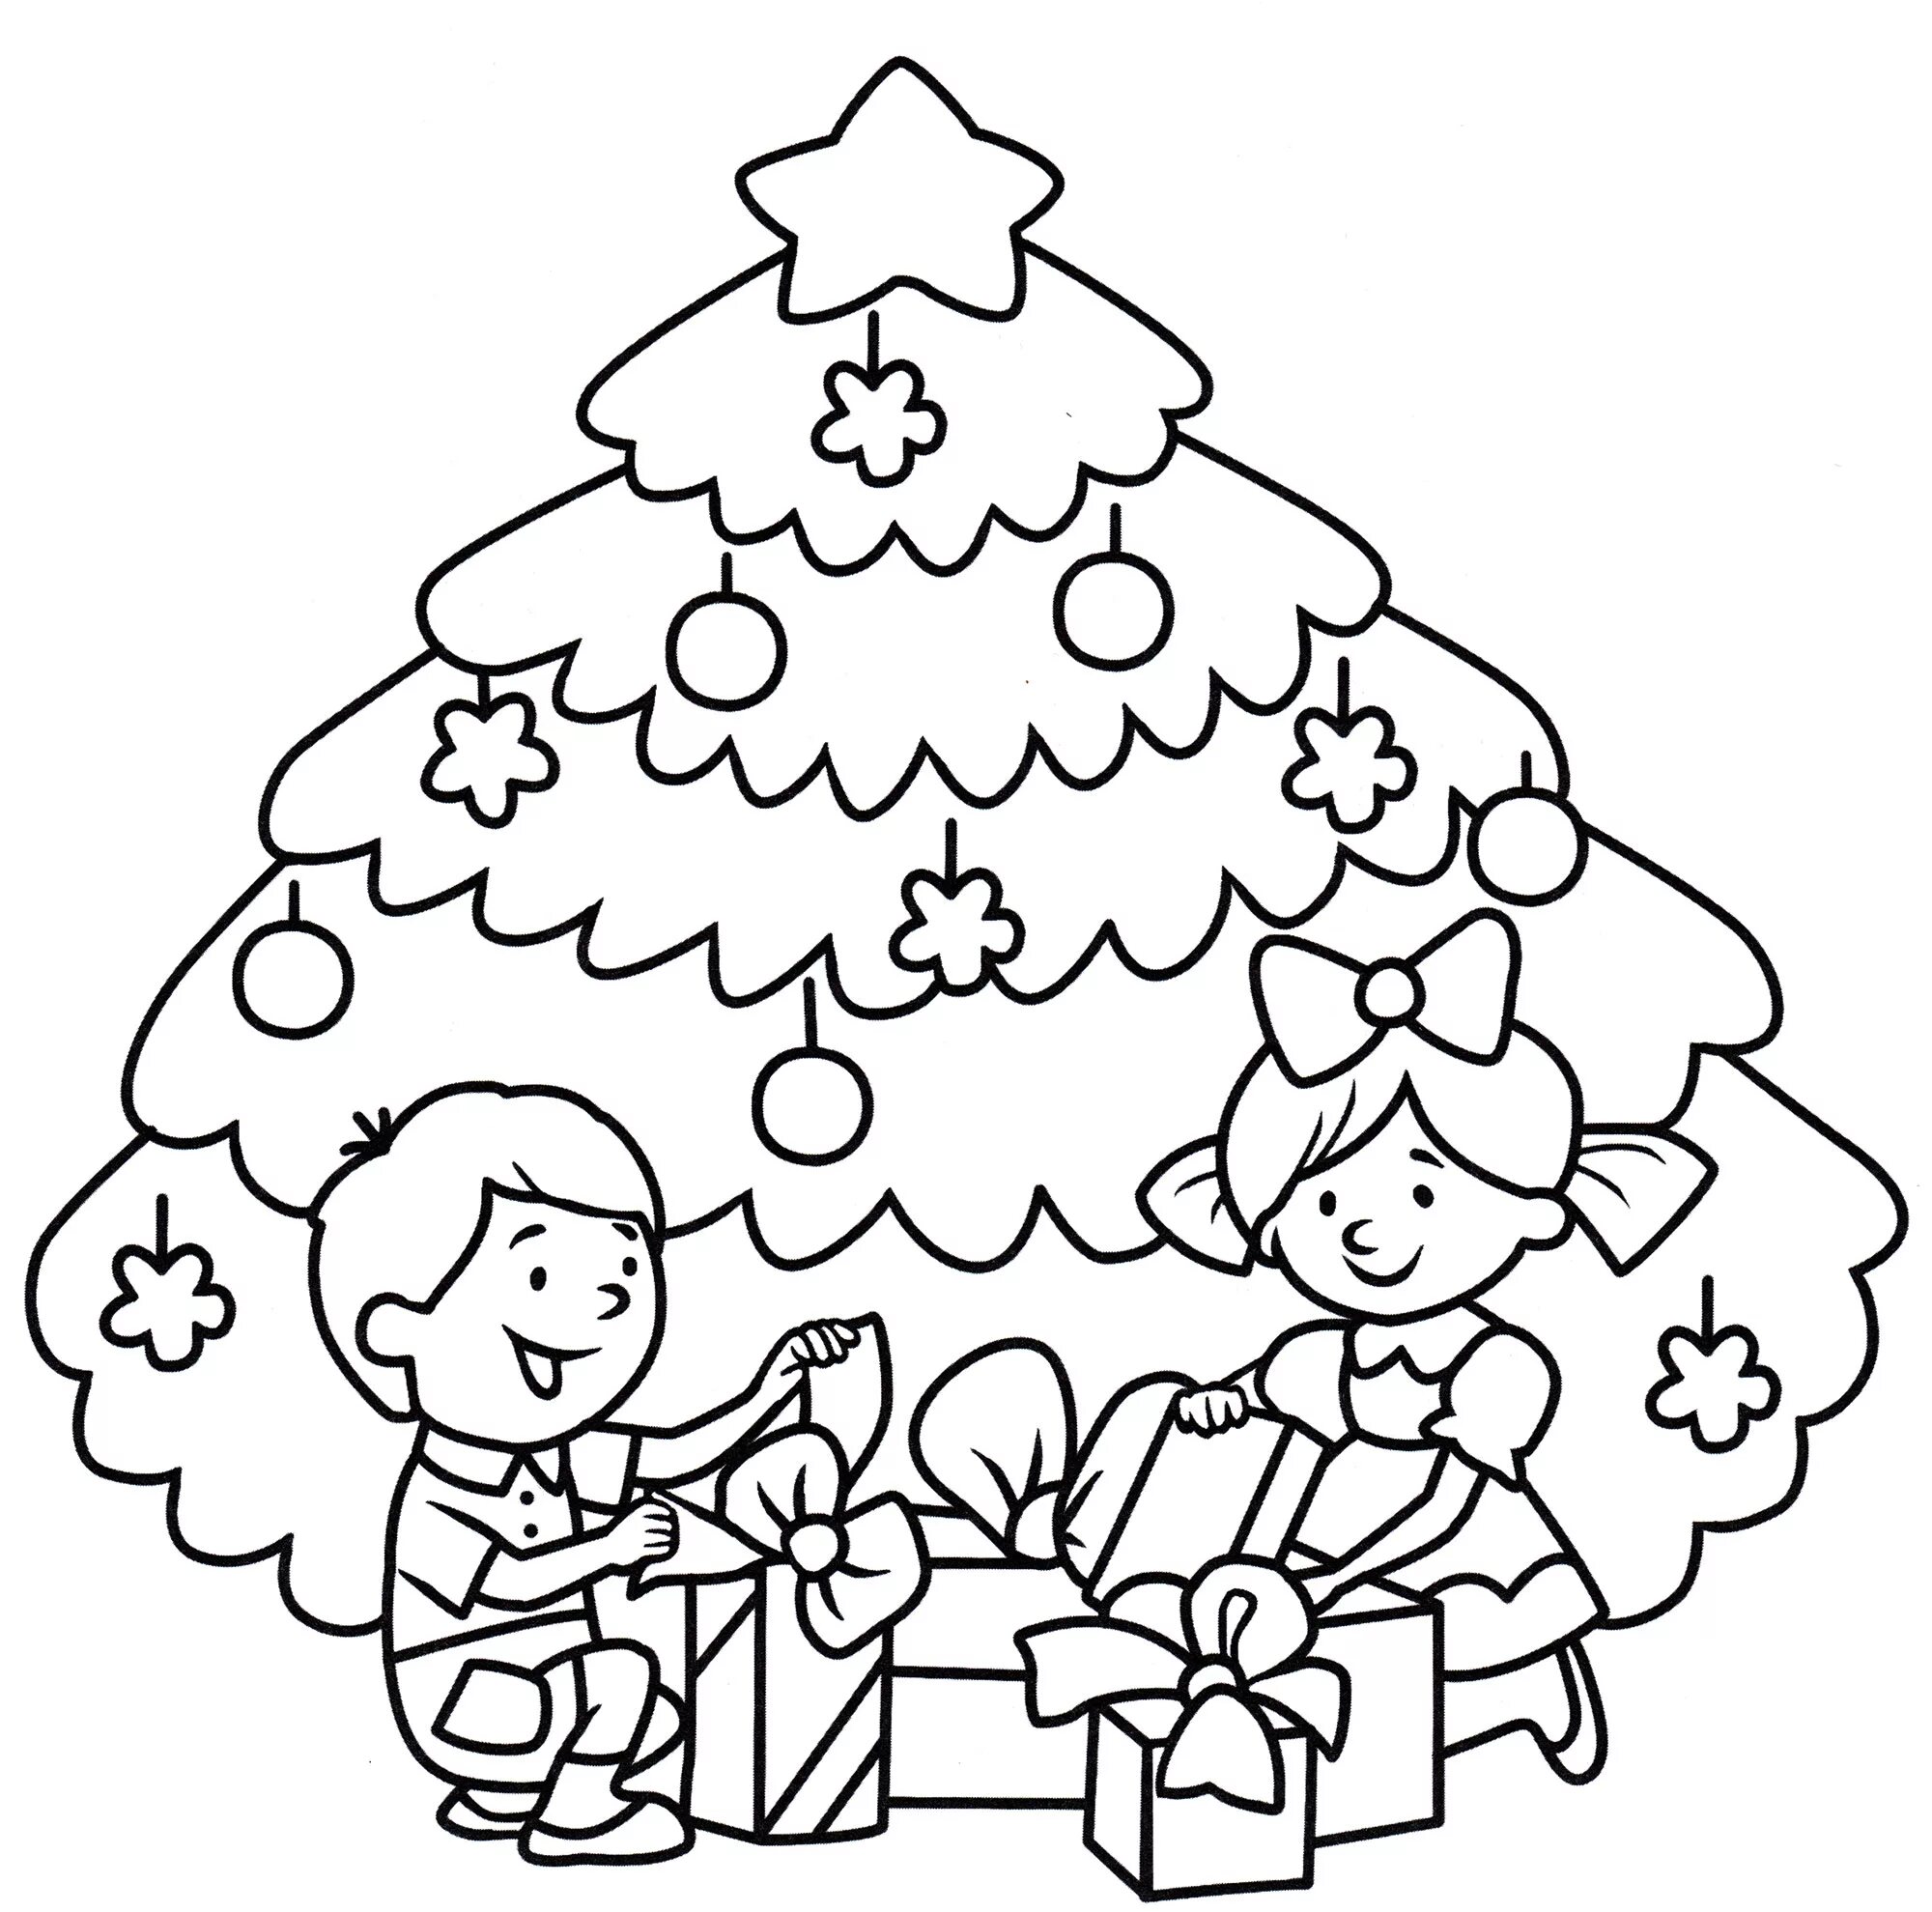 Christmas tree live coloring for 5-6 year olds